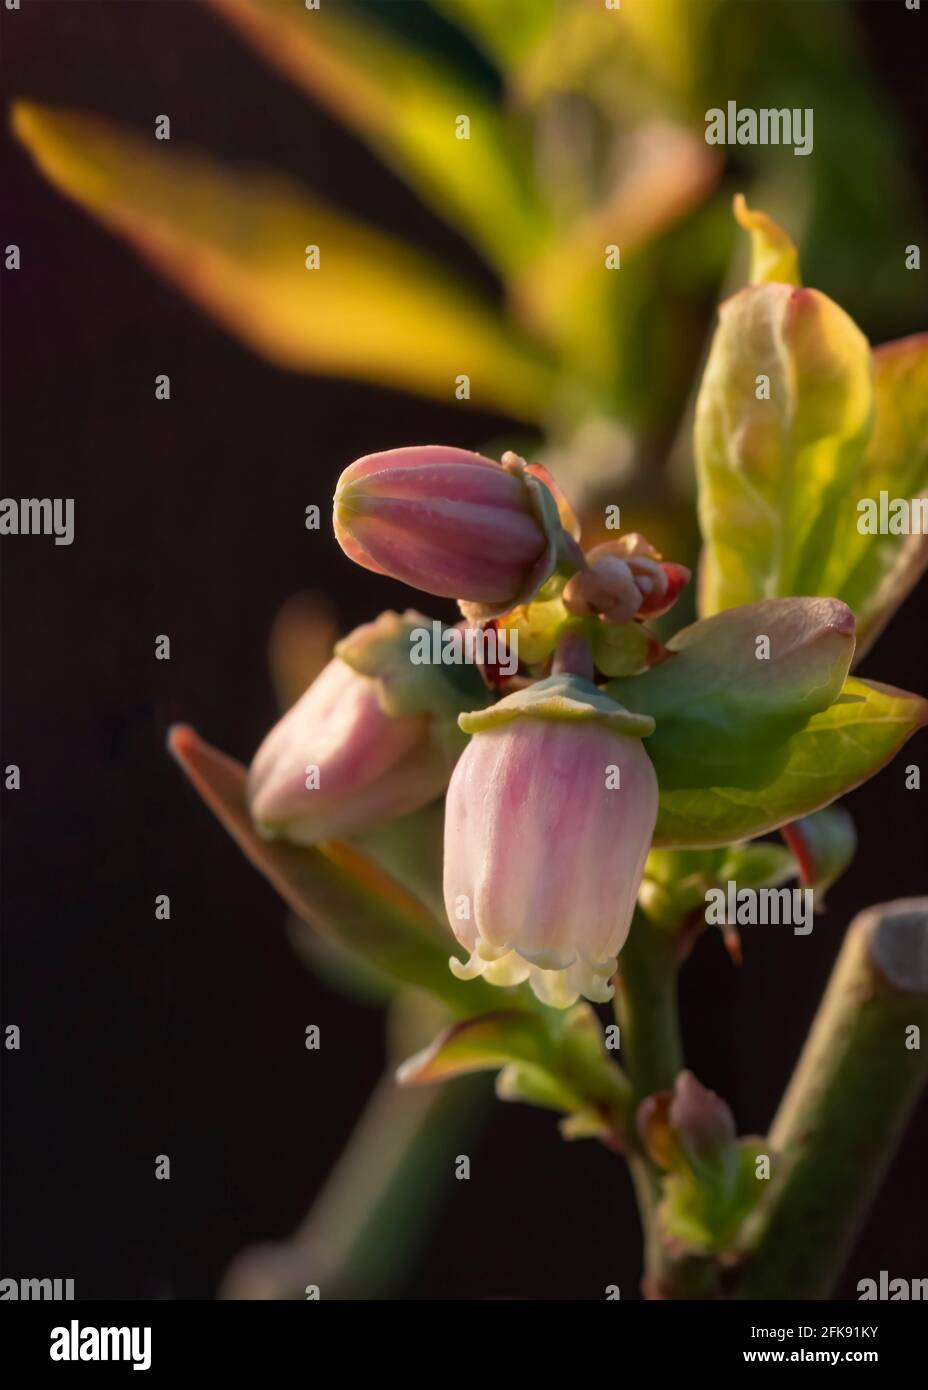 focus on a single blueberry flower on a branch with buds   macro close up in shallow depth of field   dark  background for copy space Stock Photo